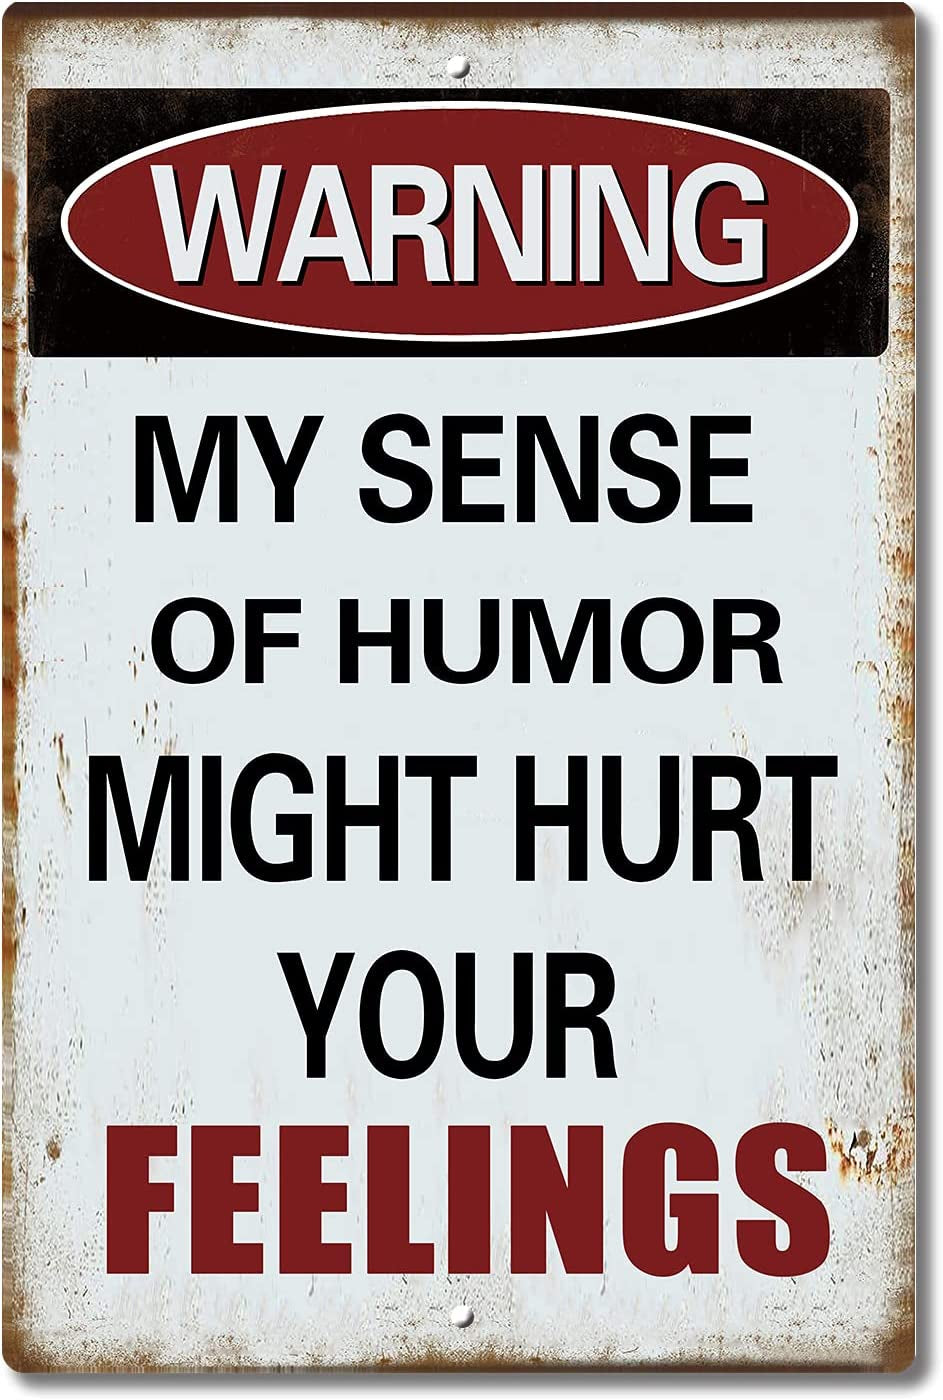 Warning My Sense of Humor Might Hurt Your Feelings! ¨C Funny Aluminum Metal Sign for Your Garage， Man Cave， Yard or Wall，12 X 8 Inches